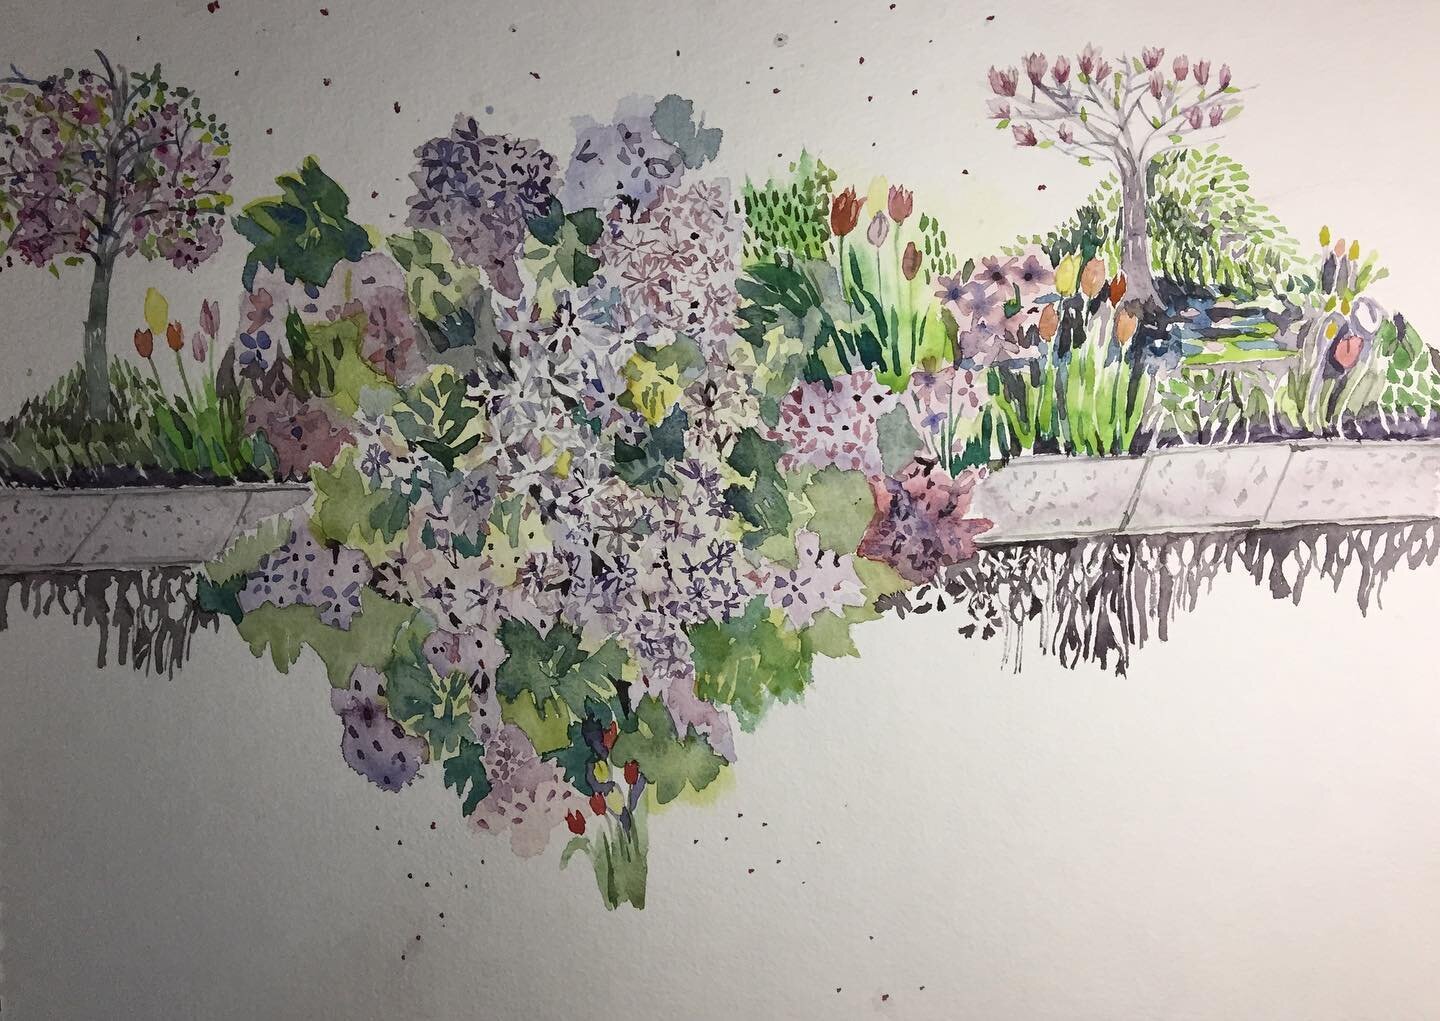 I am chasing the constant dance of my neighbours&rsquo; gardens on my daily walks. It awakens me and fills me with hope. #watercolorpainting #contemporaryart #canadianart